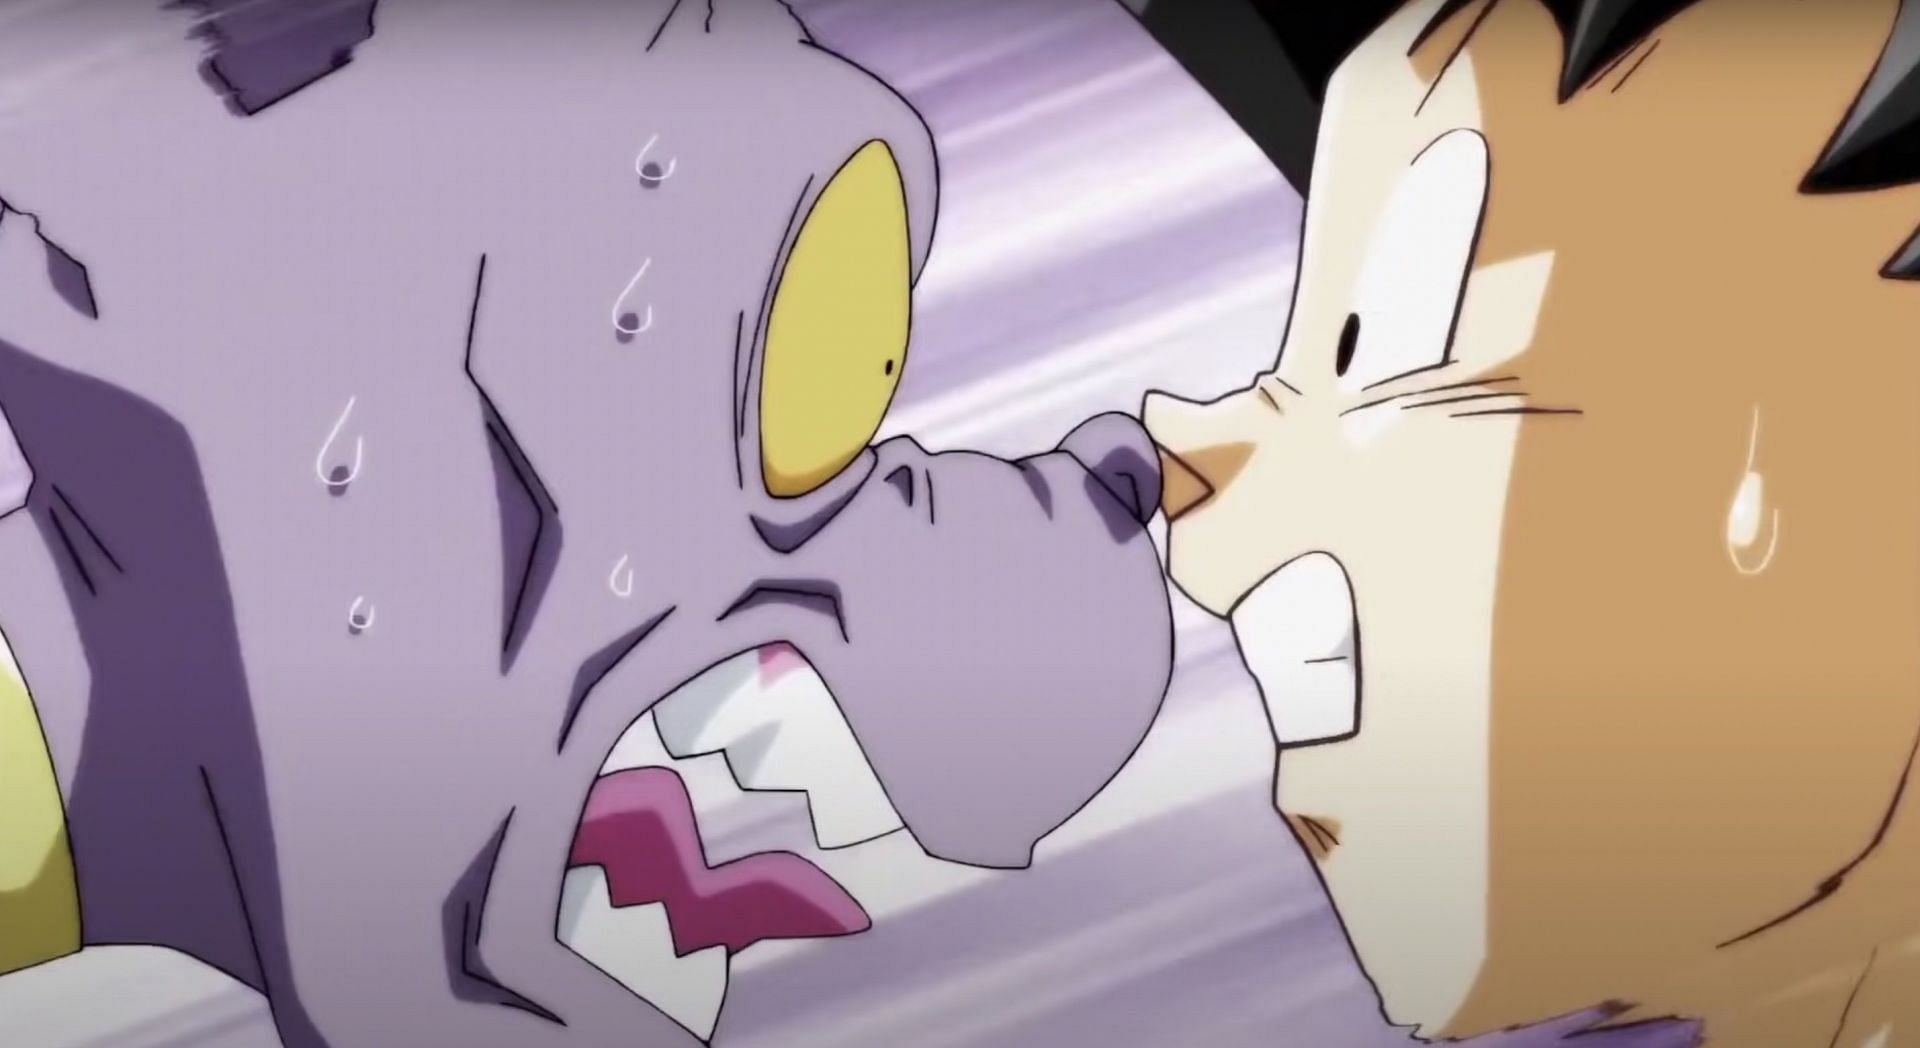 Beerus freaking out after Goku returns from Zeno's palace (Image via Toei Animation)